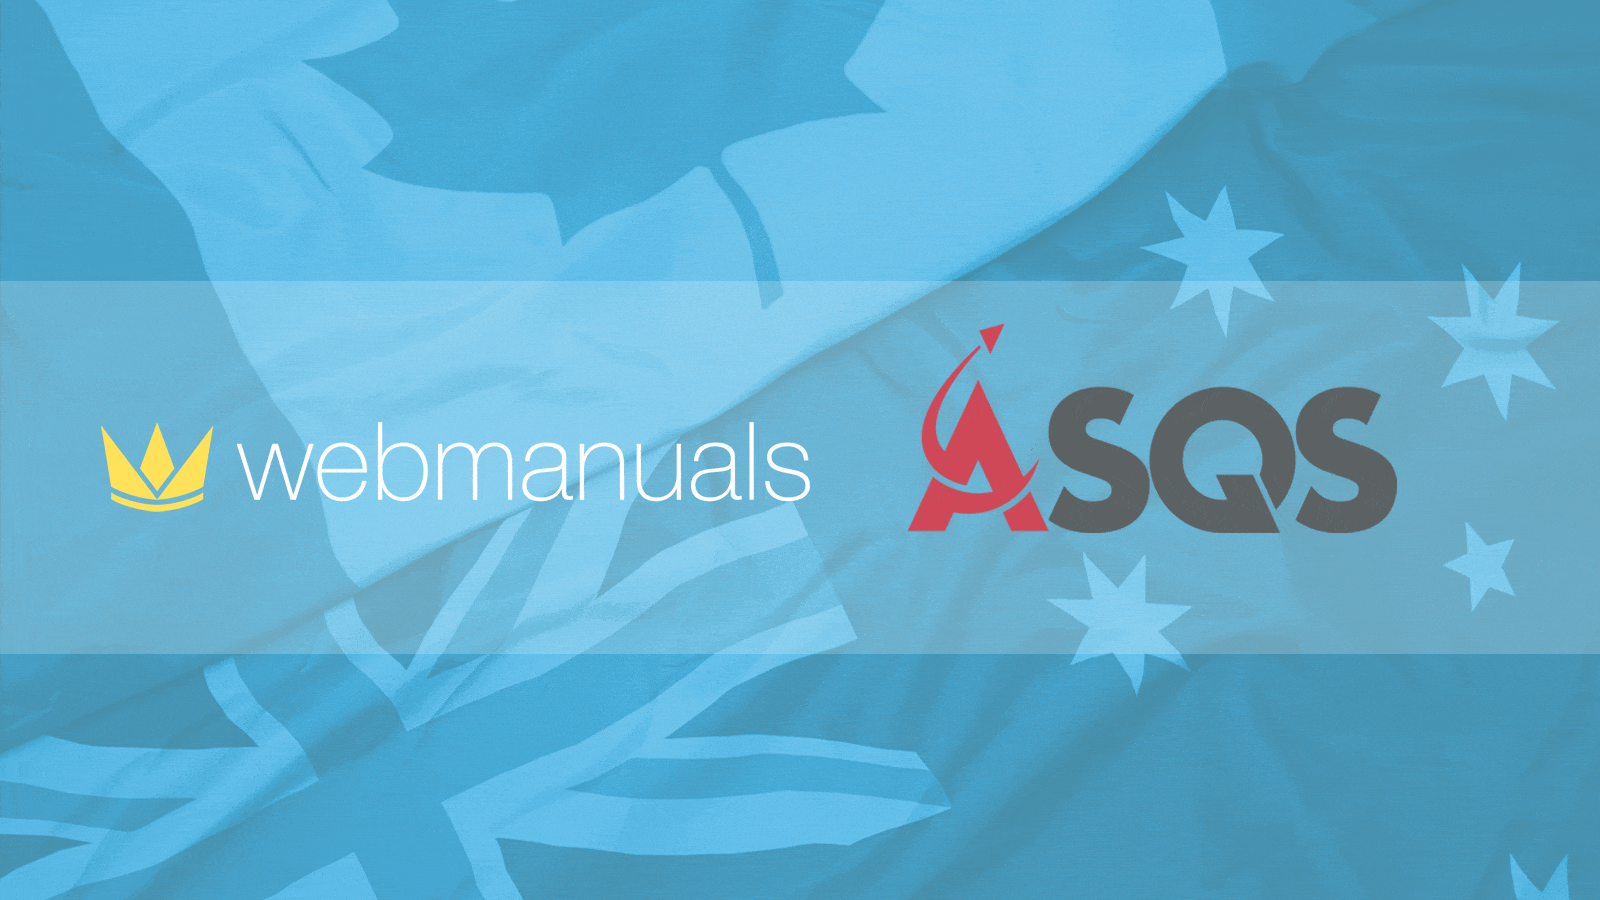 Web Manuals Partners with ASQS for Australian and Compliance Libraries